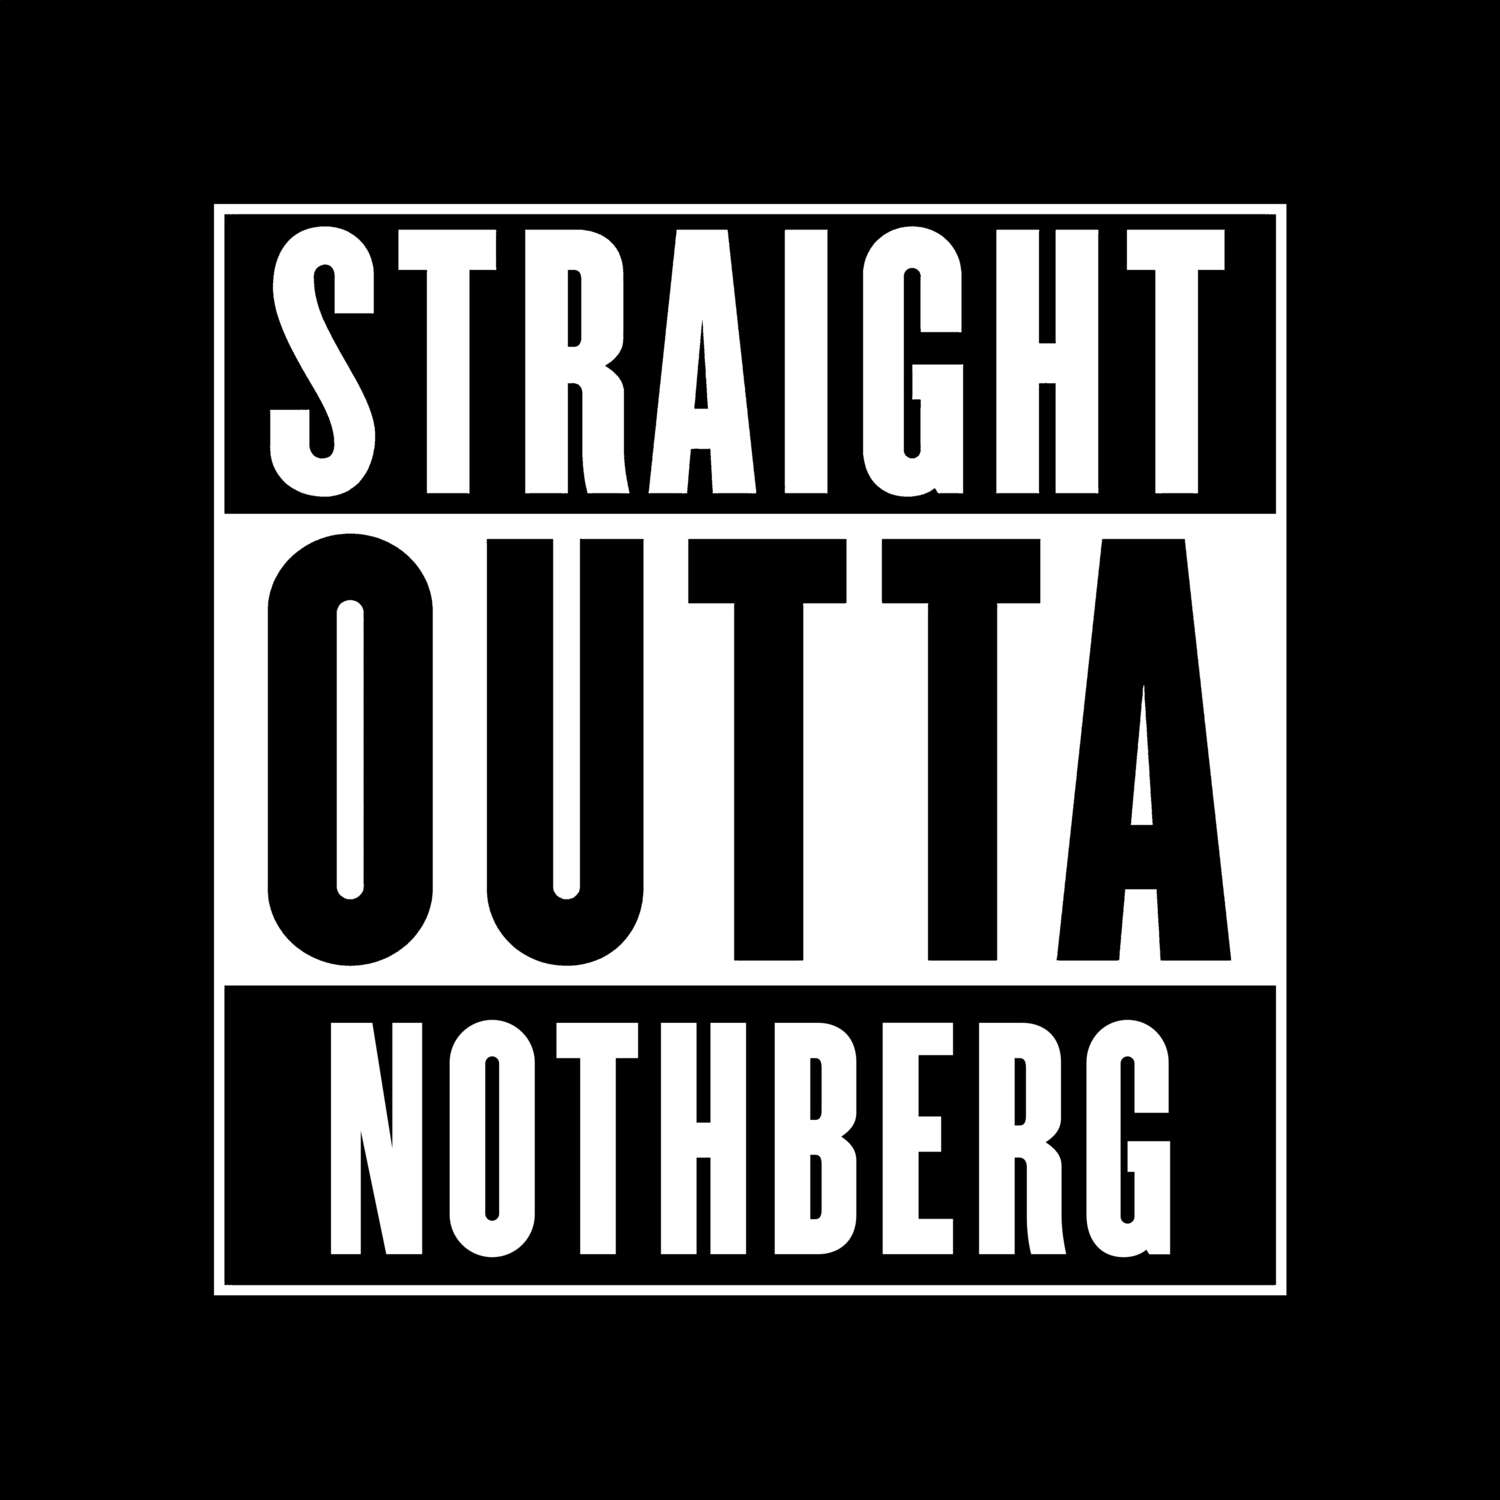 Nothberg T-Shirt »Straight Outta«